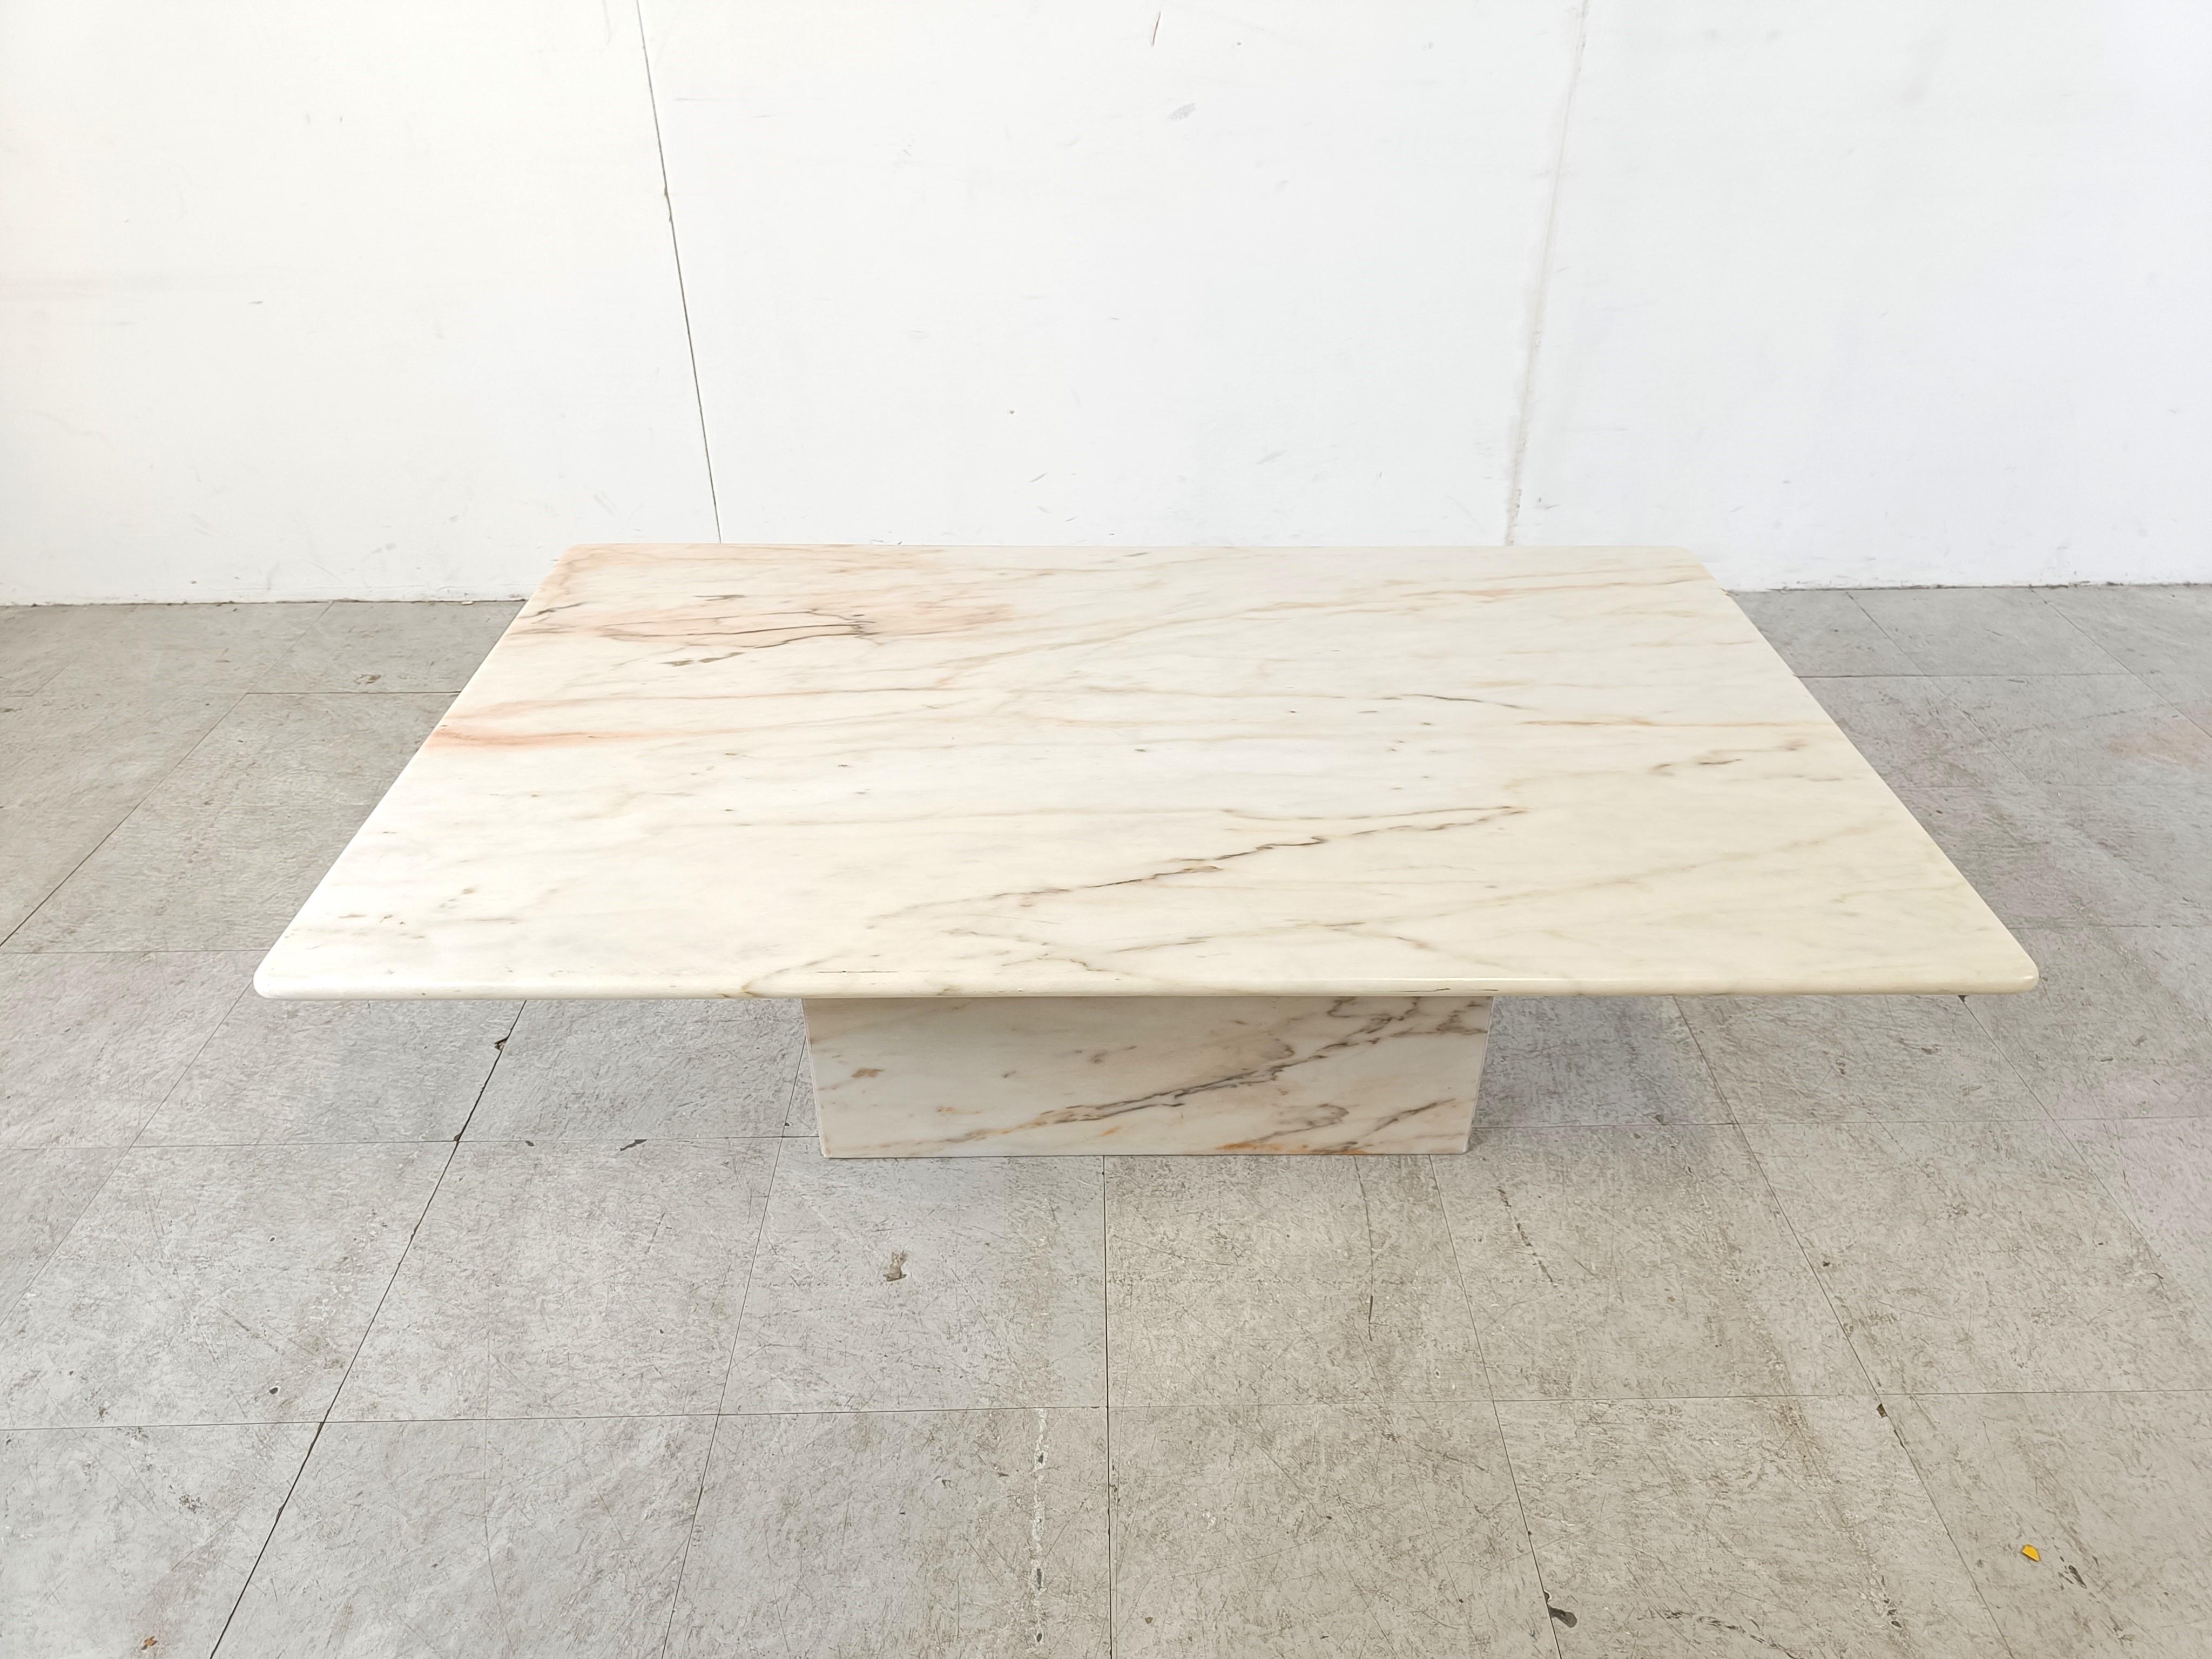 Rectangular white marble coffee table with a central base.

The marble has a beautiful natural veining all over.

Good condition with normal age related wear.

1970s - Italy

Height: 40cm/15.74